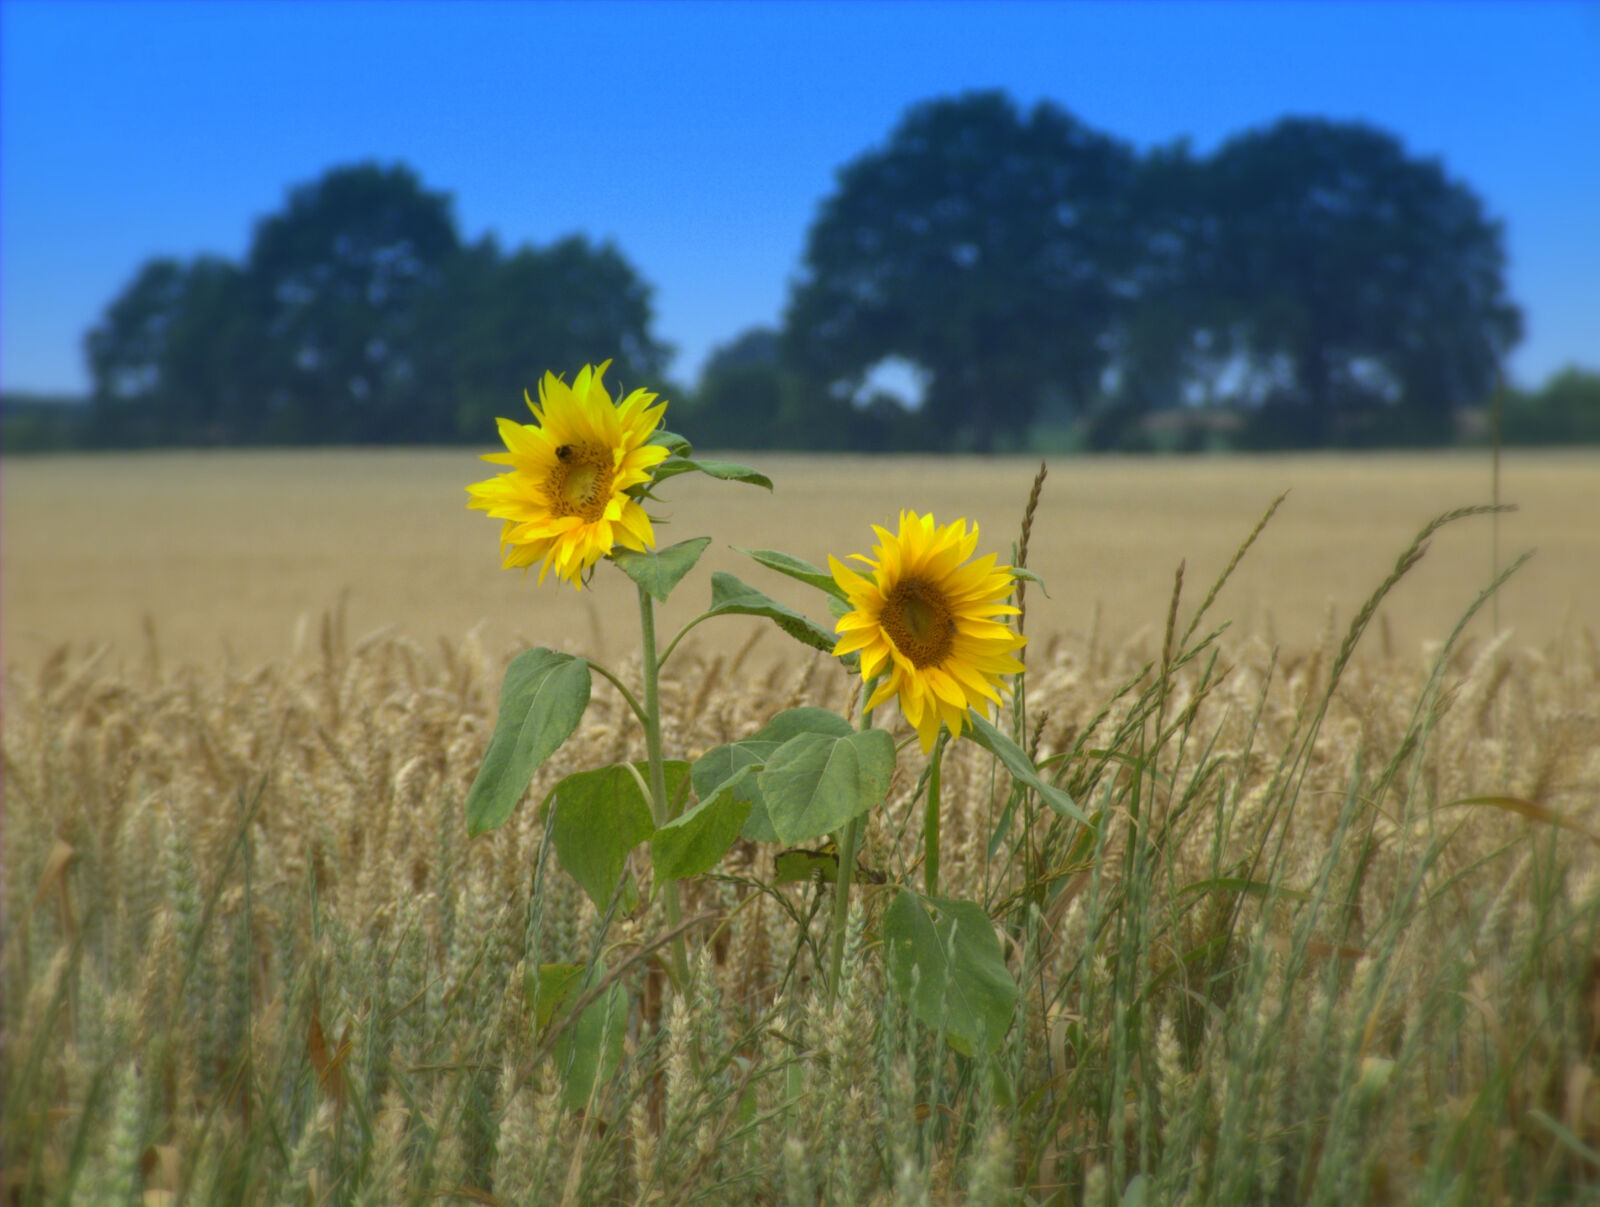 Fujifilm FinePix S6500fd sample photo. Agriculture, nature, sunflower, wheat photography